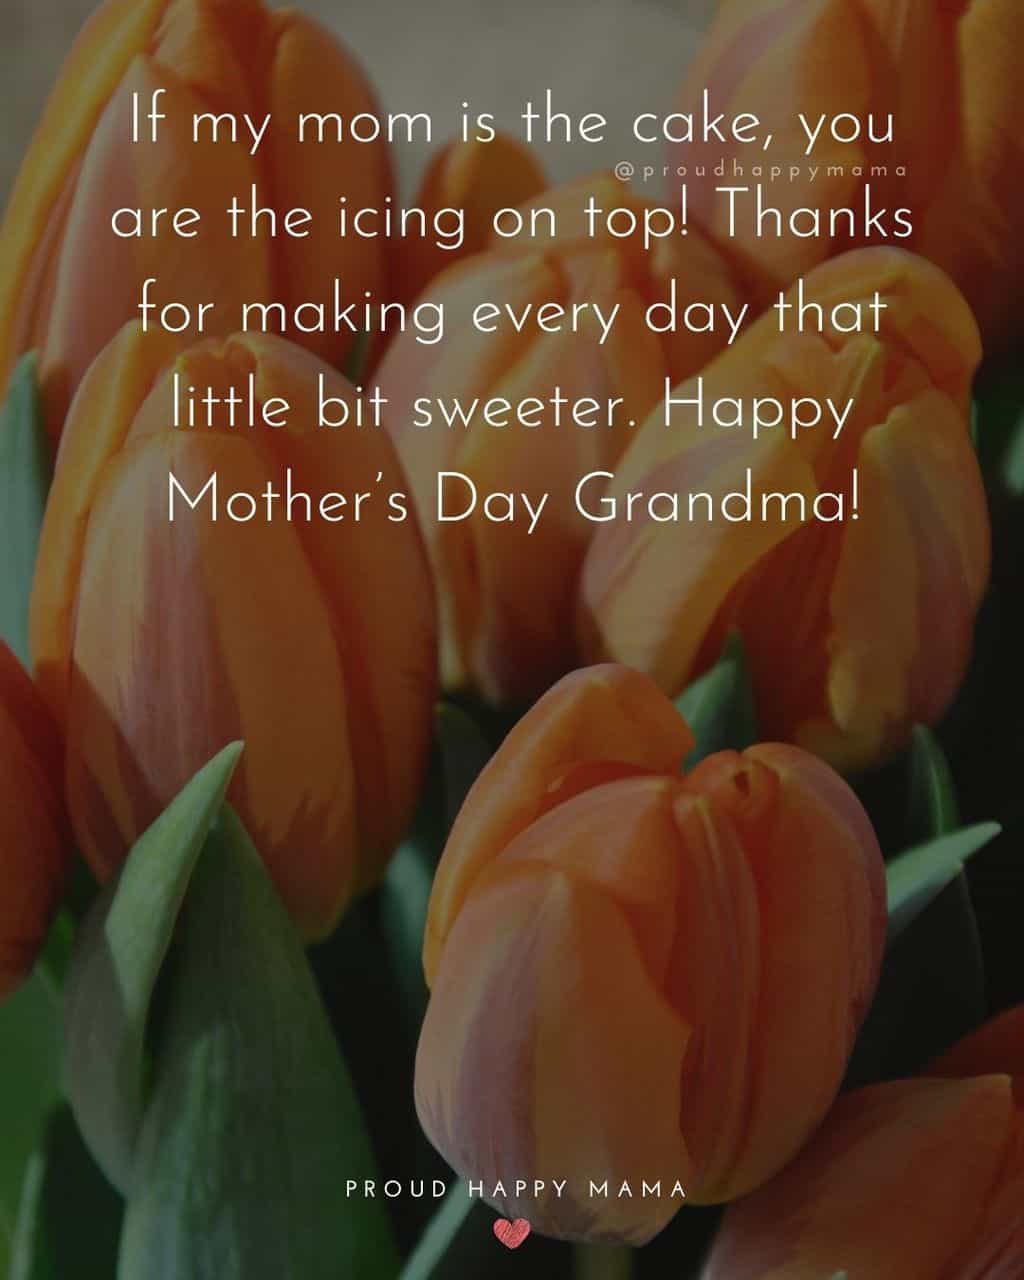 Happy Mothers Day Quotes To Grandma - If my mom is the cake, you are the icing on top! Thanks for making every day that